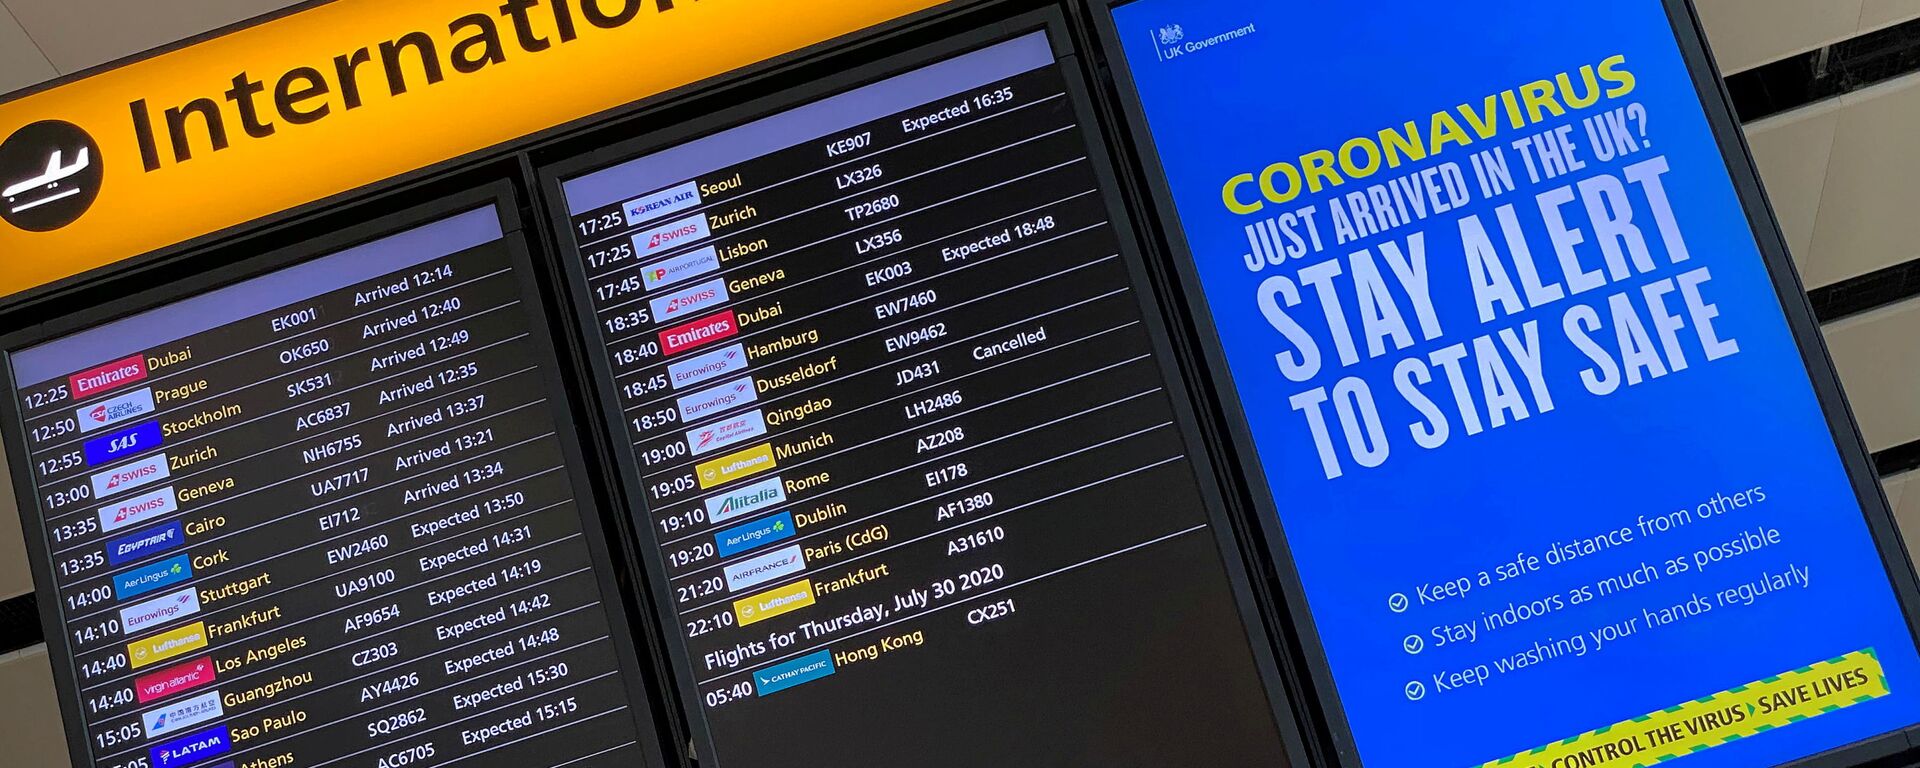 A public health campaign message is displayed on an arrivals information board at Heathrow Airport, following the outbreak of the coronavirus disease (COVID-19), London, Britain, July 29, 2020 - Sputnik International, 1920, 29.11.2021